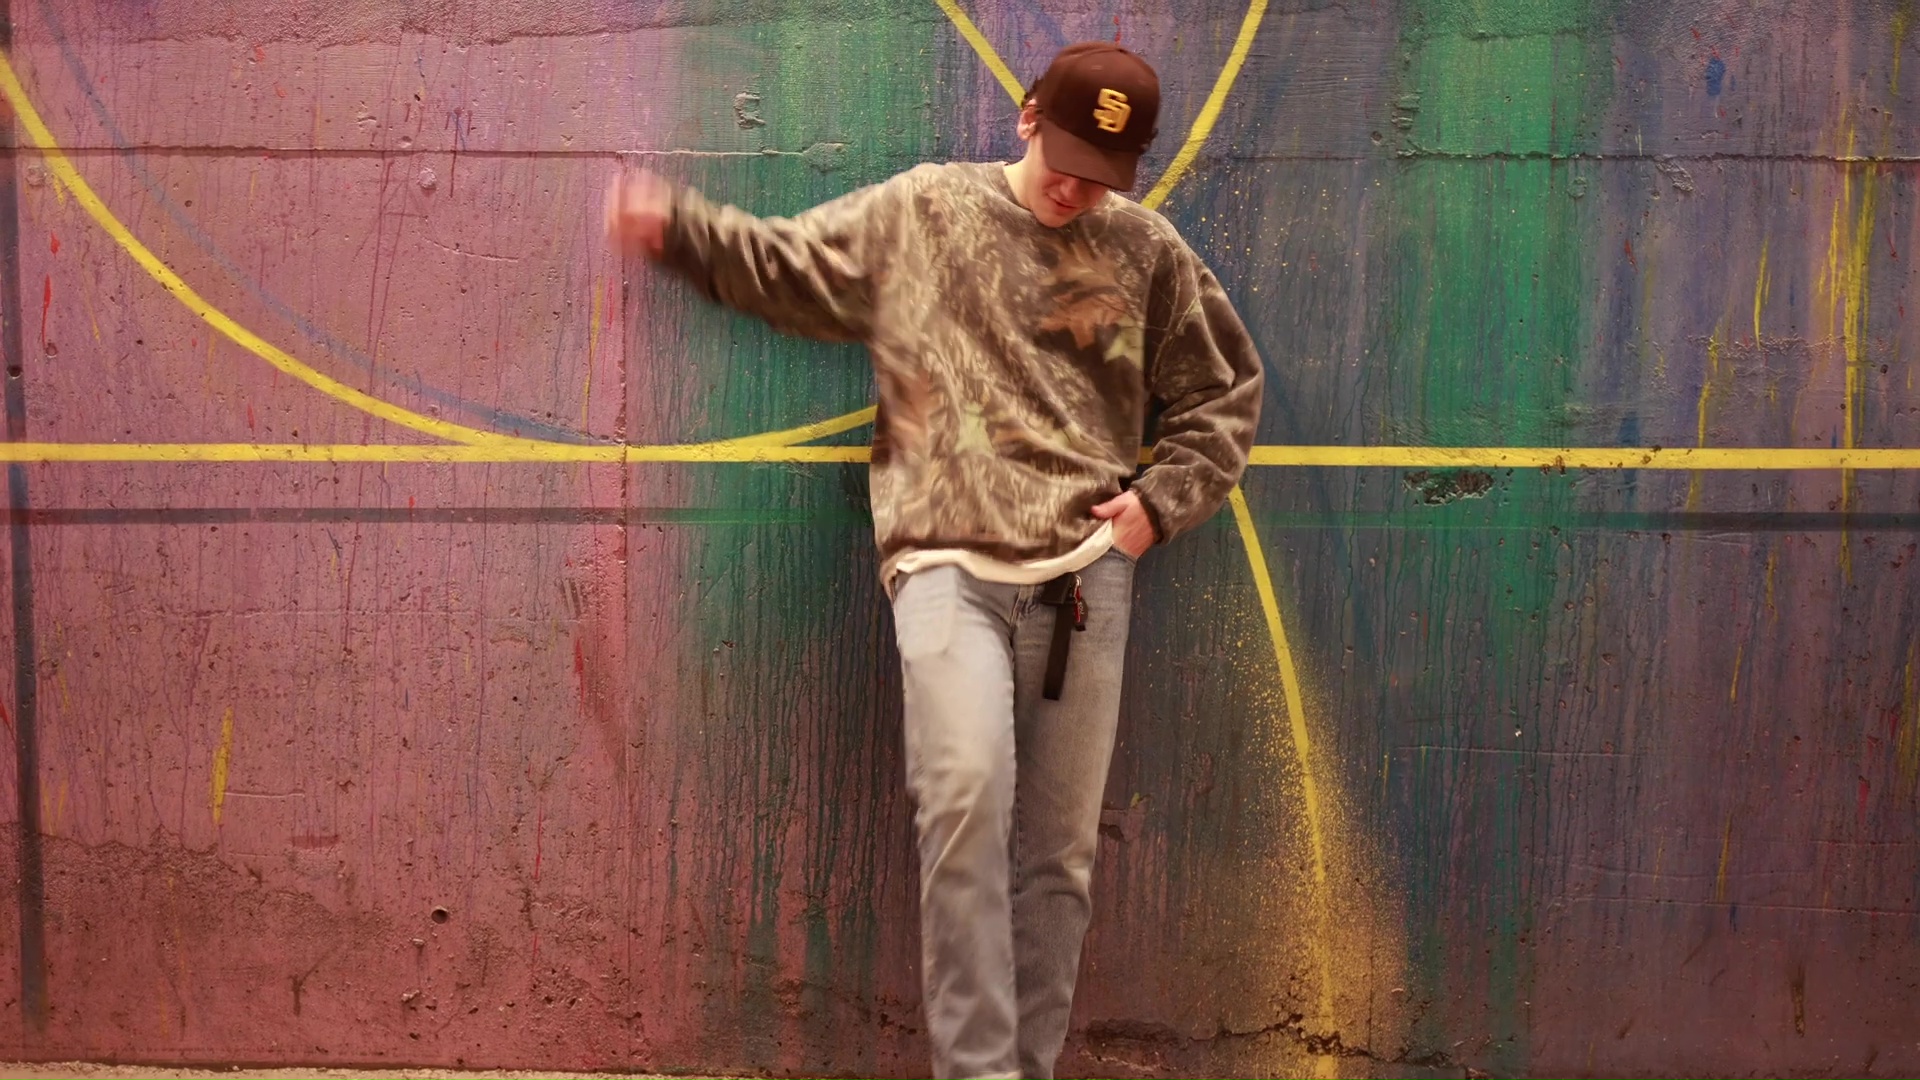 Alex Angelo in Music Video: Did You Get That?